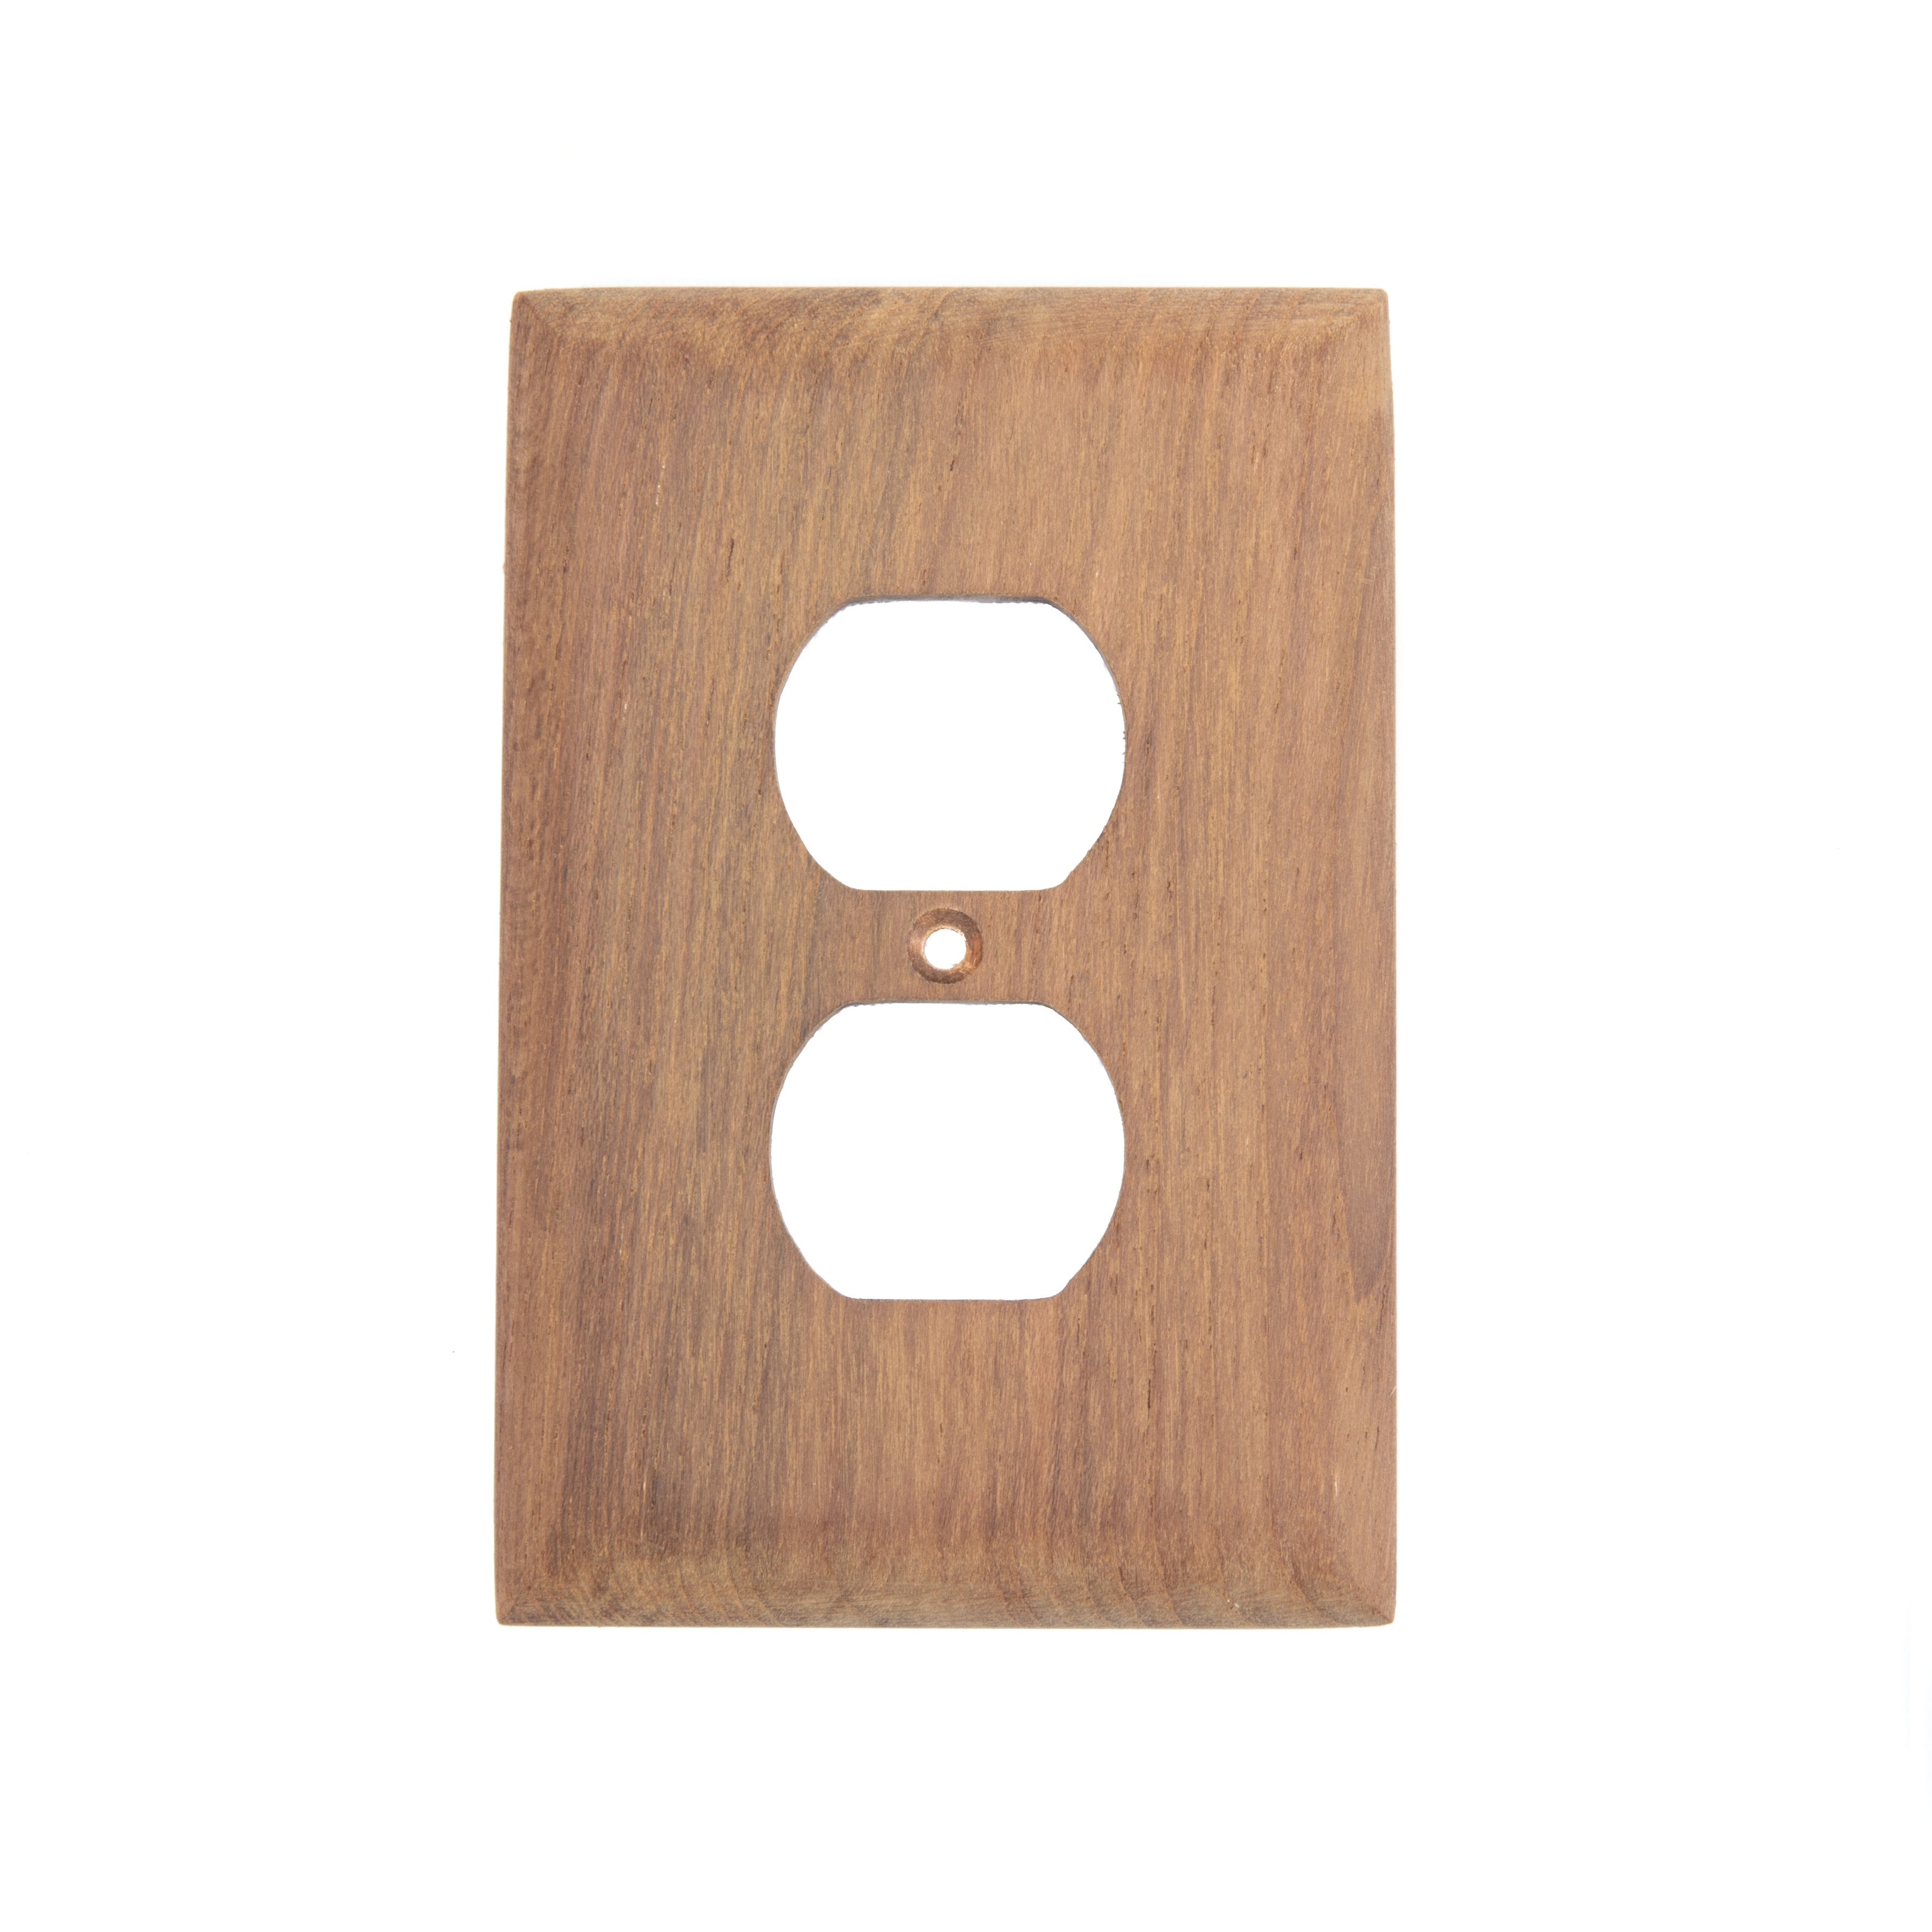 Outlet Receptacle Plate Outlet Cover - Overstock - 31770377